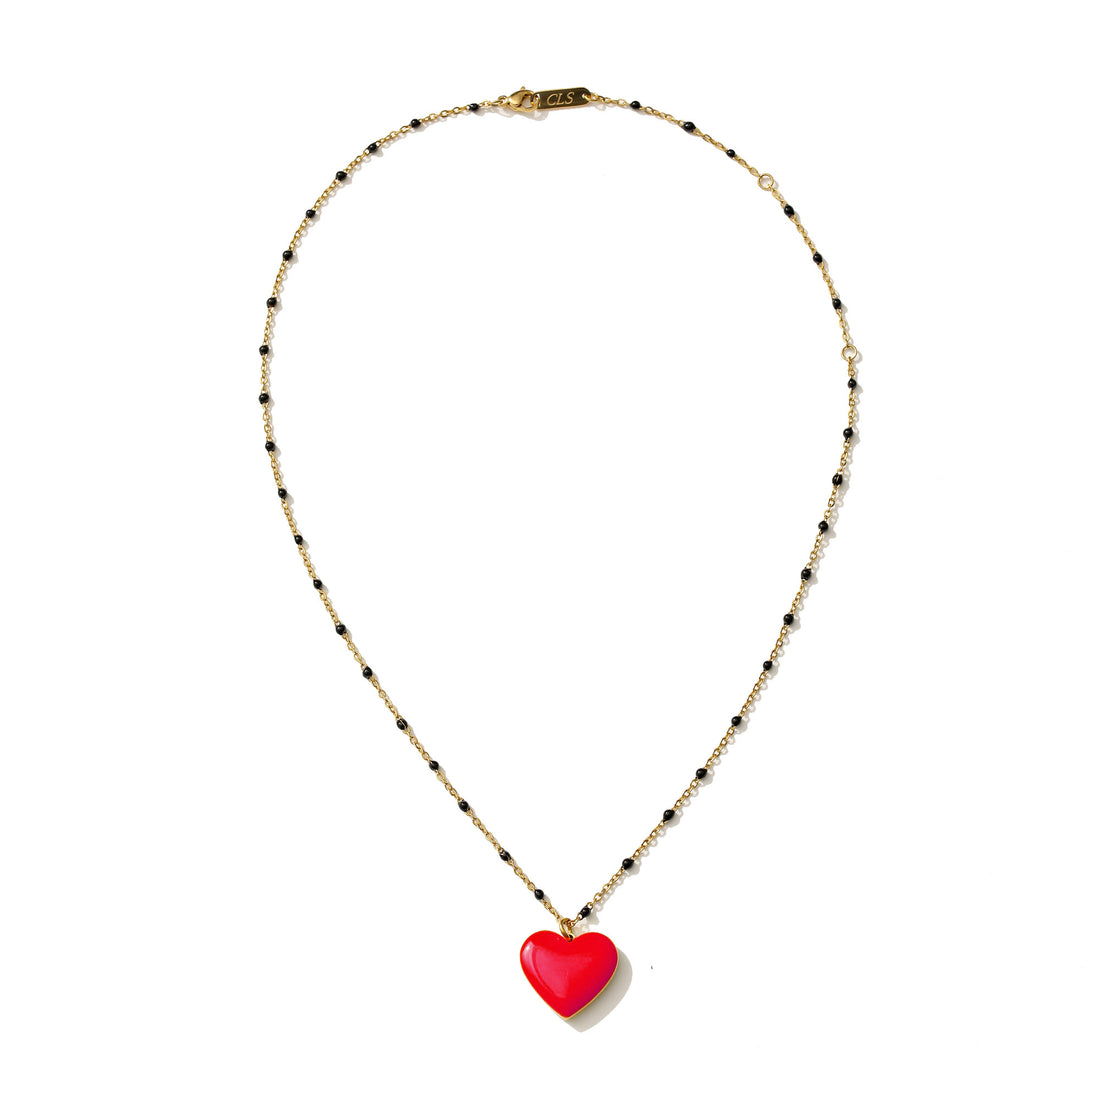 Follow Your Heart Necklace • Red & Navy